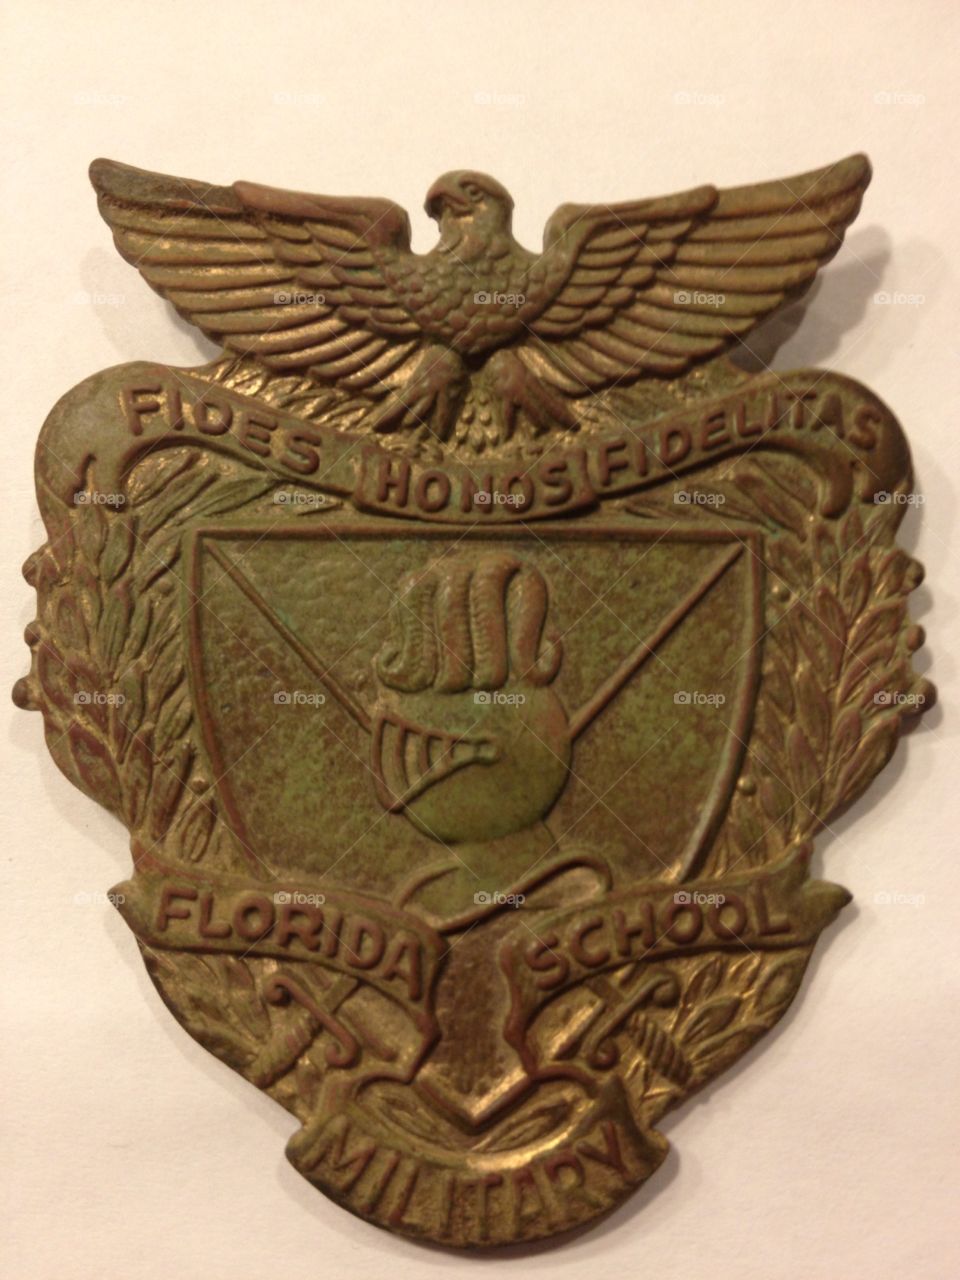 Antique Florida military academy school badge / pin found while metal detecting in Texas. 